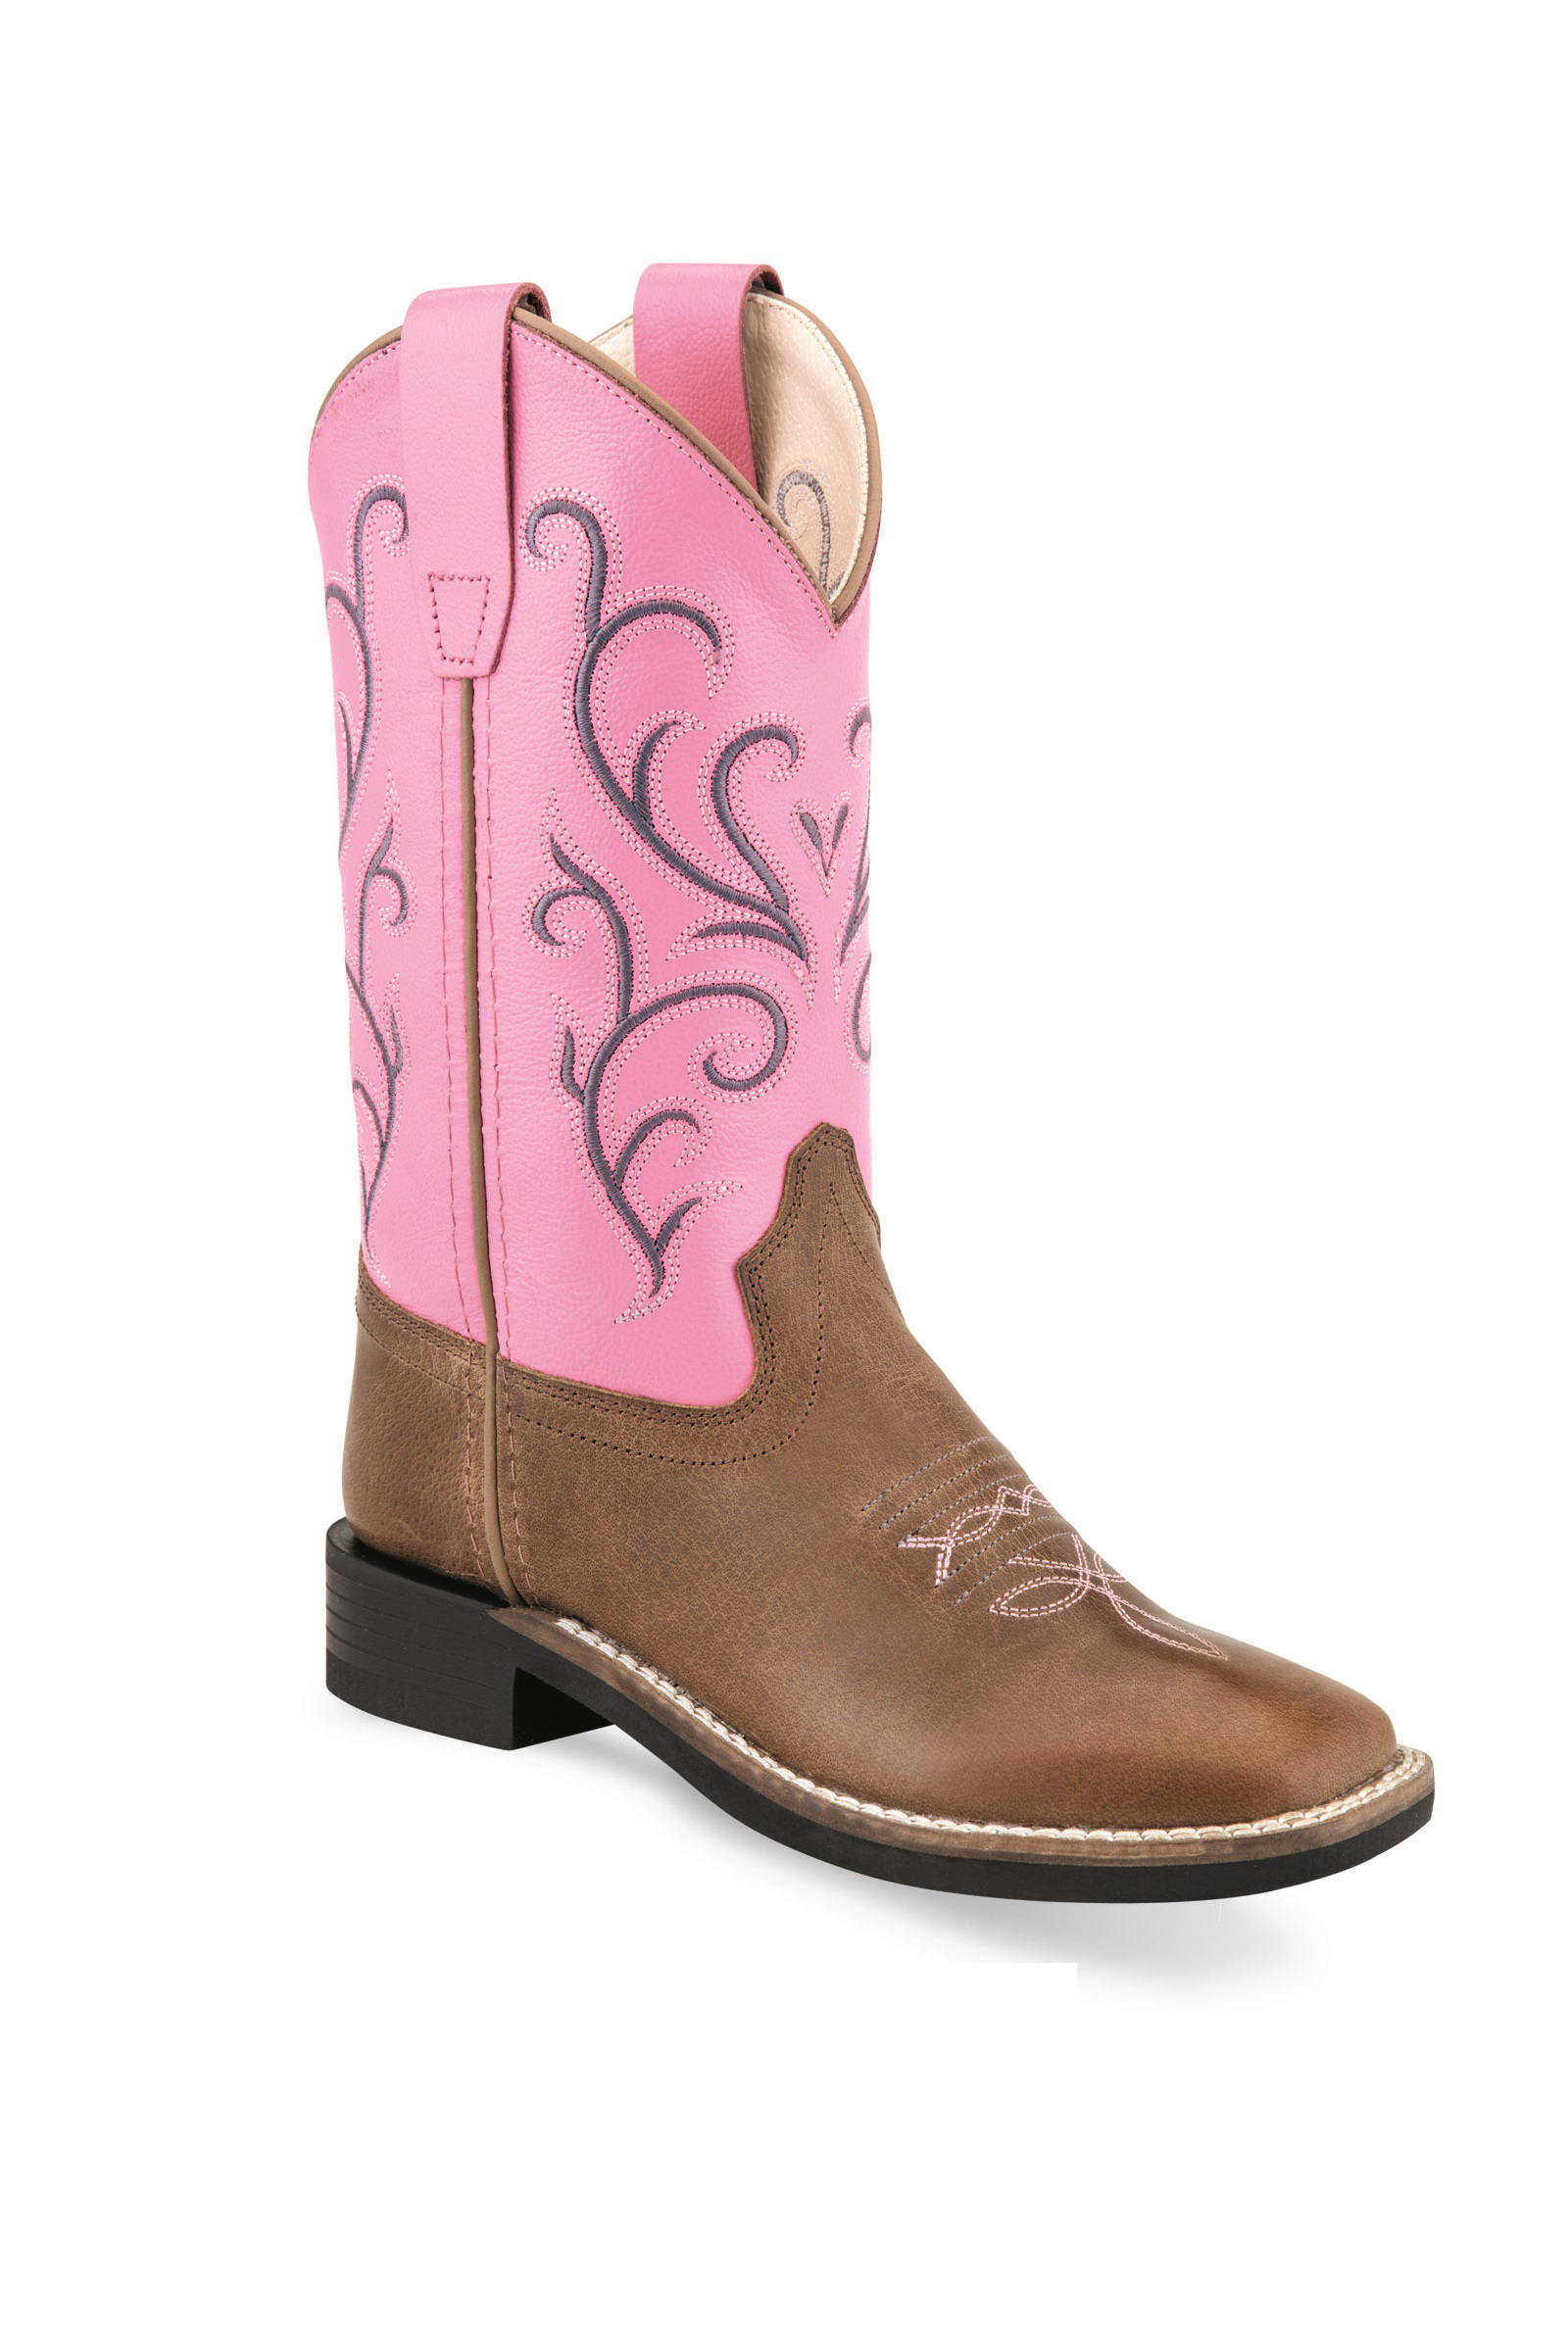 Cowboy boots for children BSC1869, brown-pink